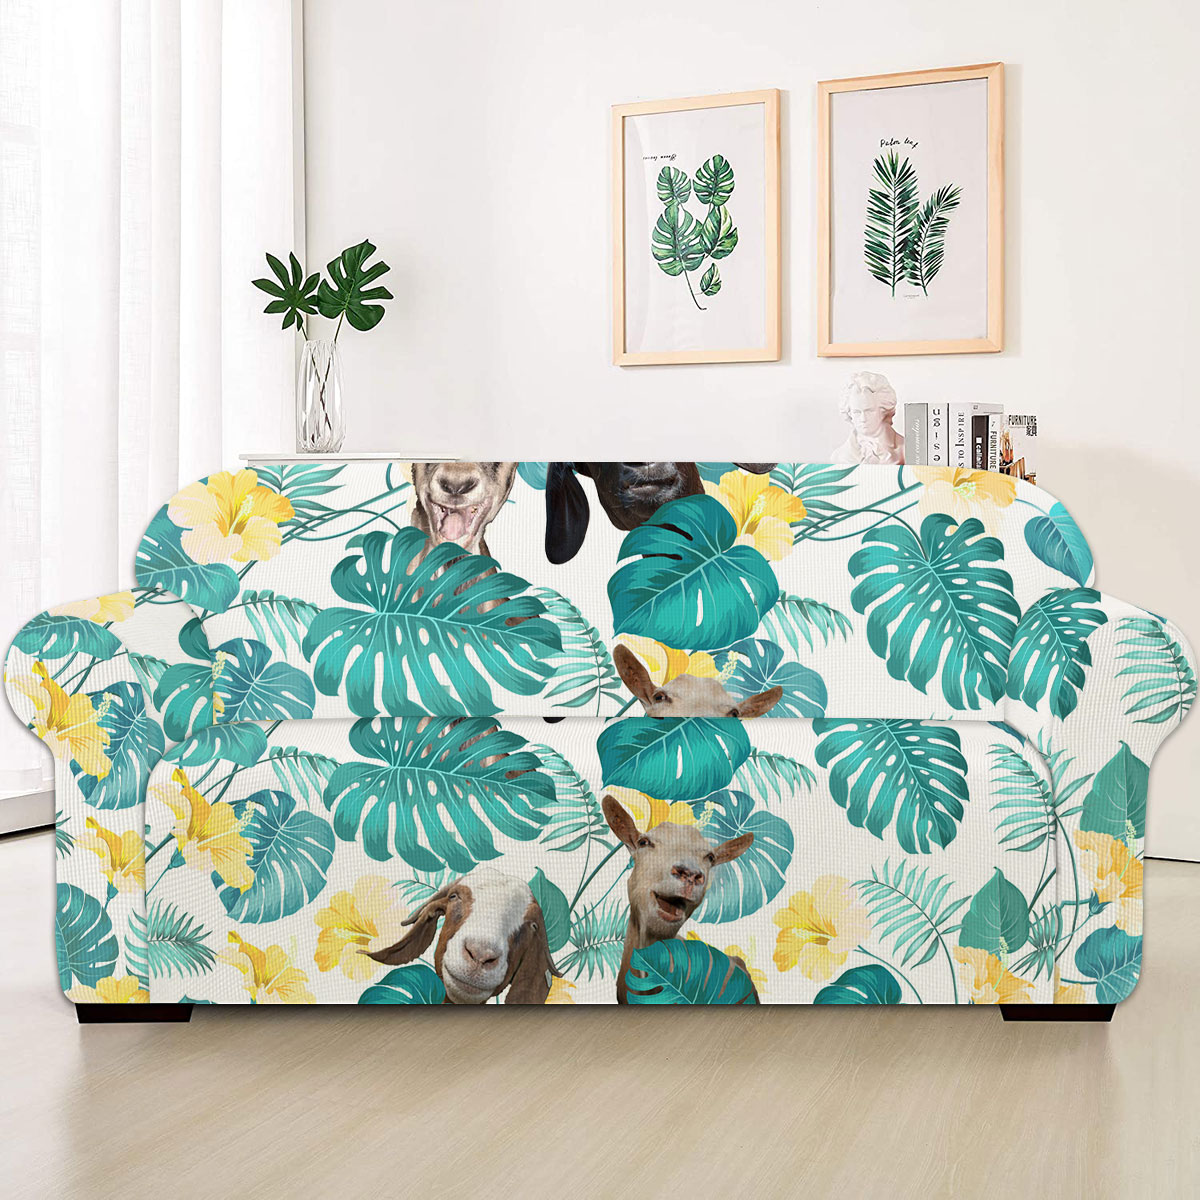 Goat In Tropical Leaves Pattern Sofa Cover